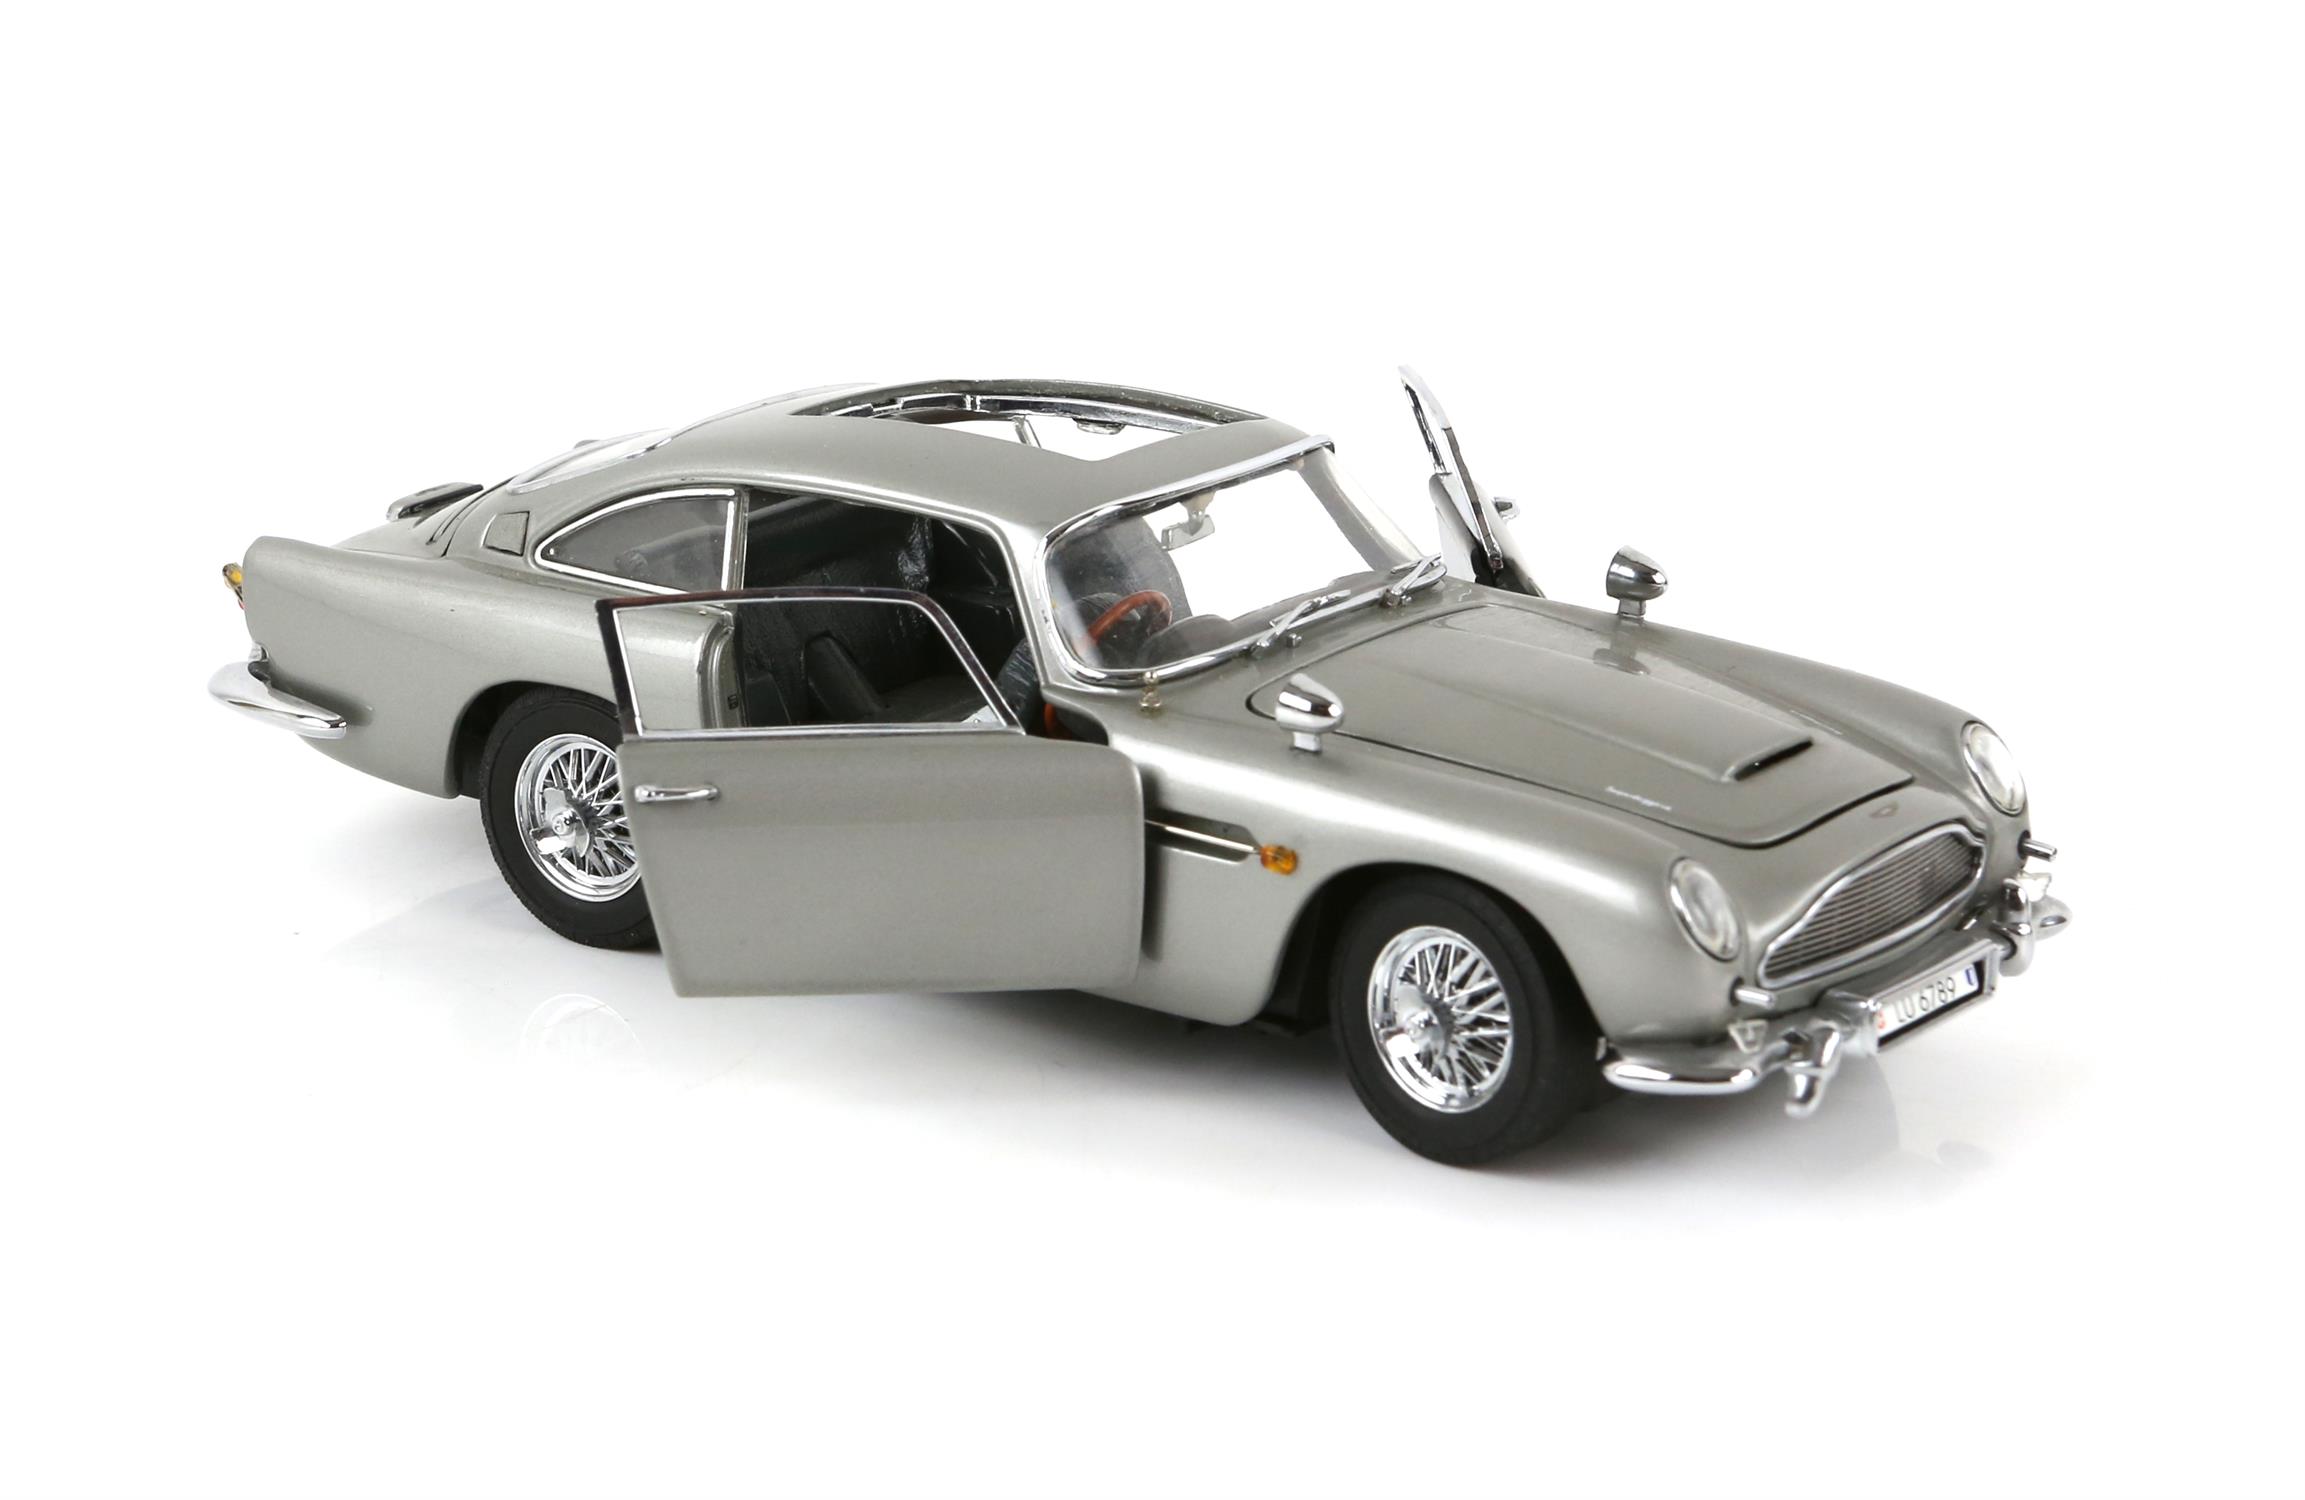 James Bond 007 - Danbury Mint Aston Martin DB5, 1:24 scale authorised replica of the car driven by - Image 3 of 5